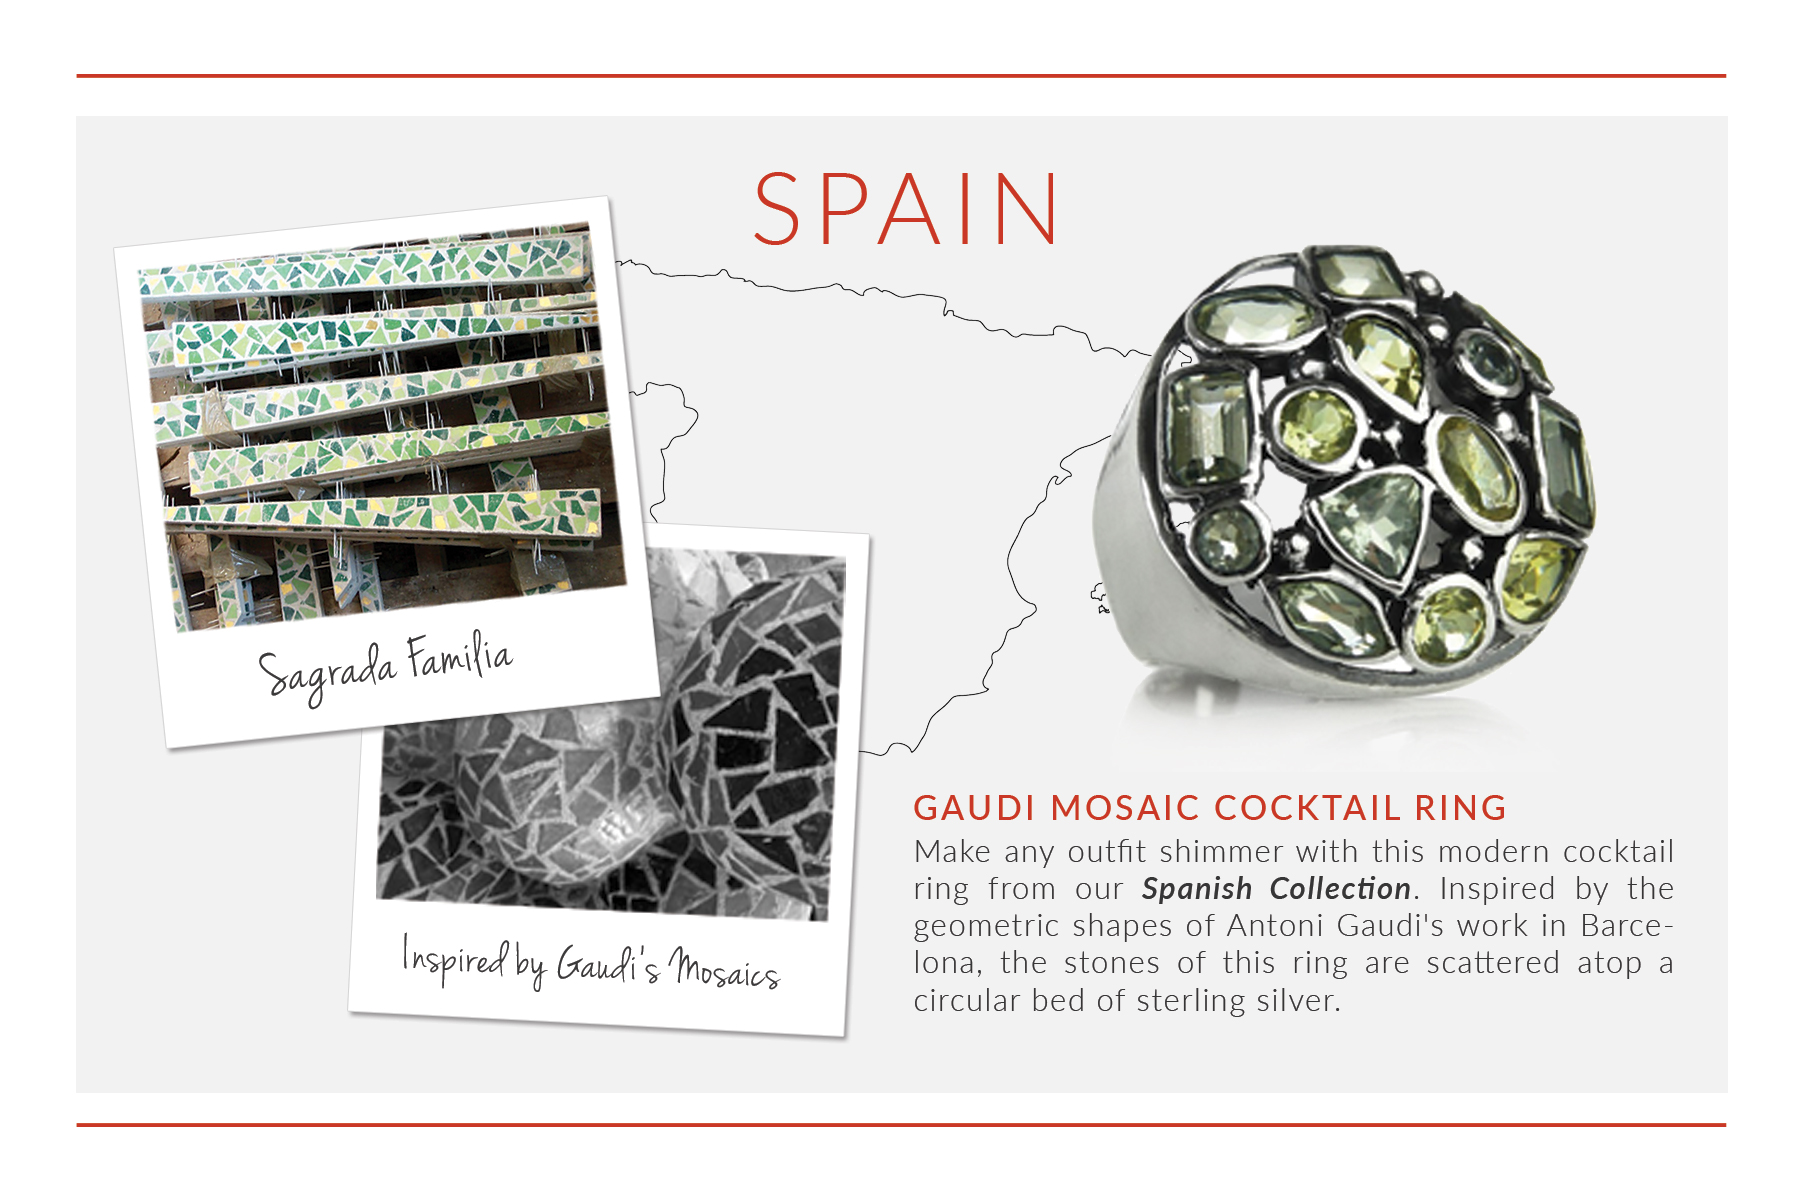 Mosaic Ring inspired by Gaudi's architecture